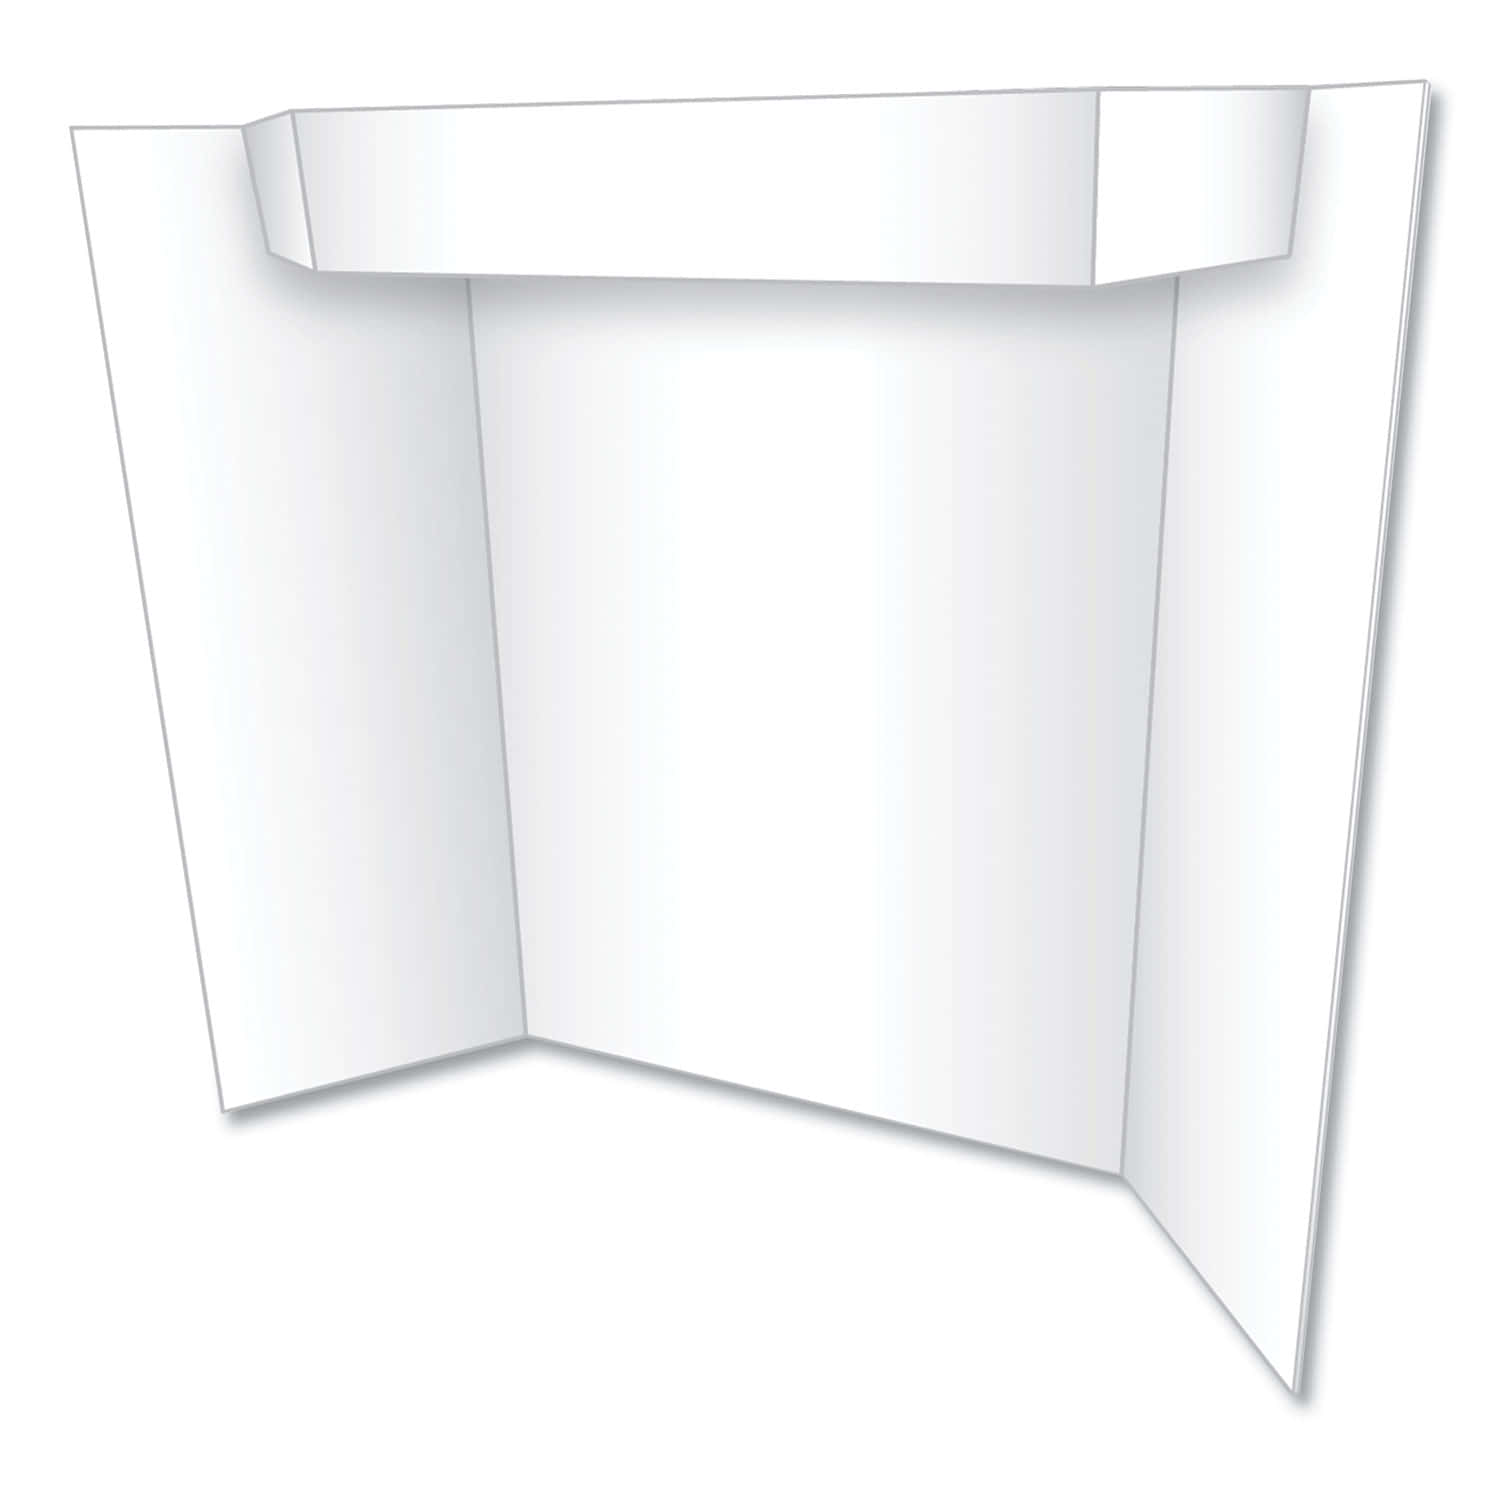 A White Paper Folder On A White Background